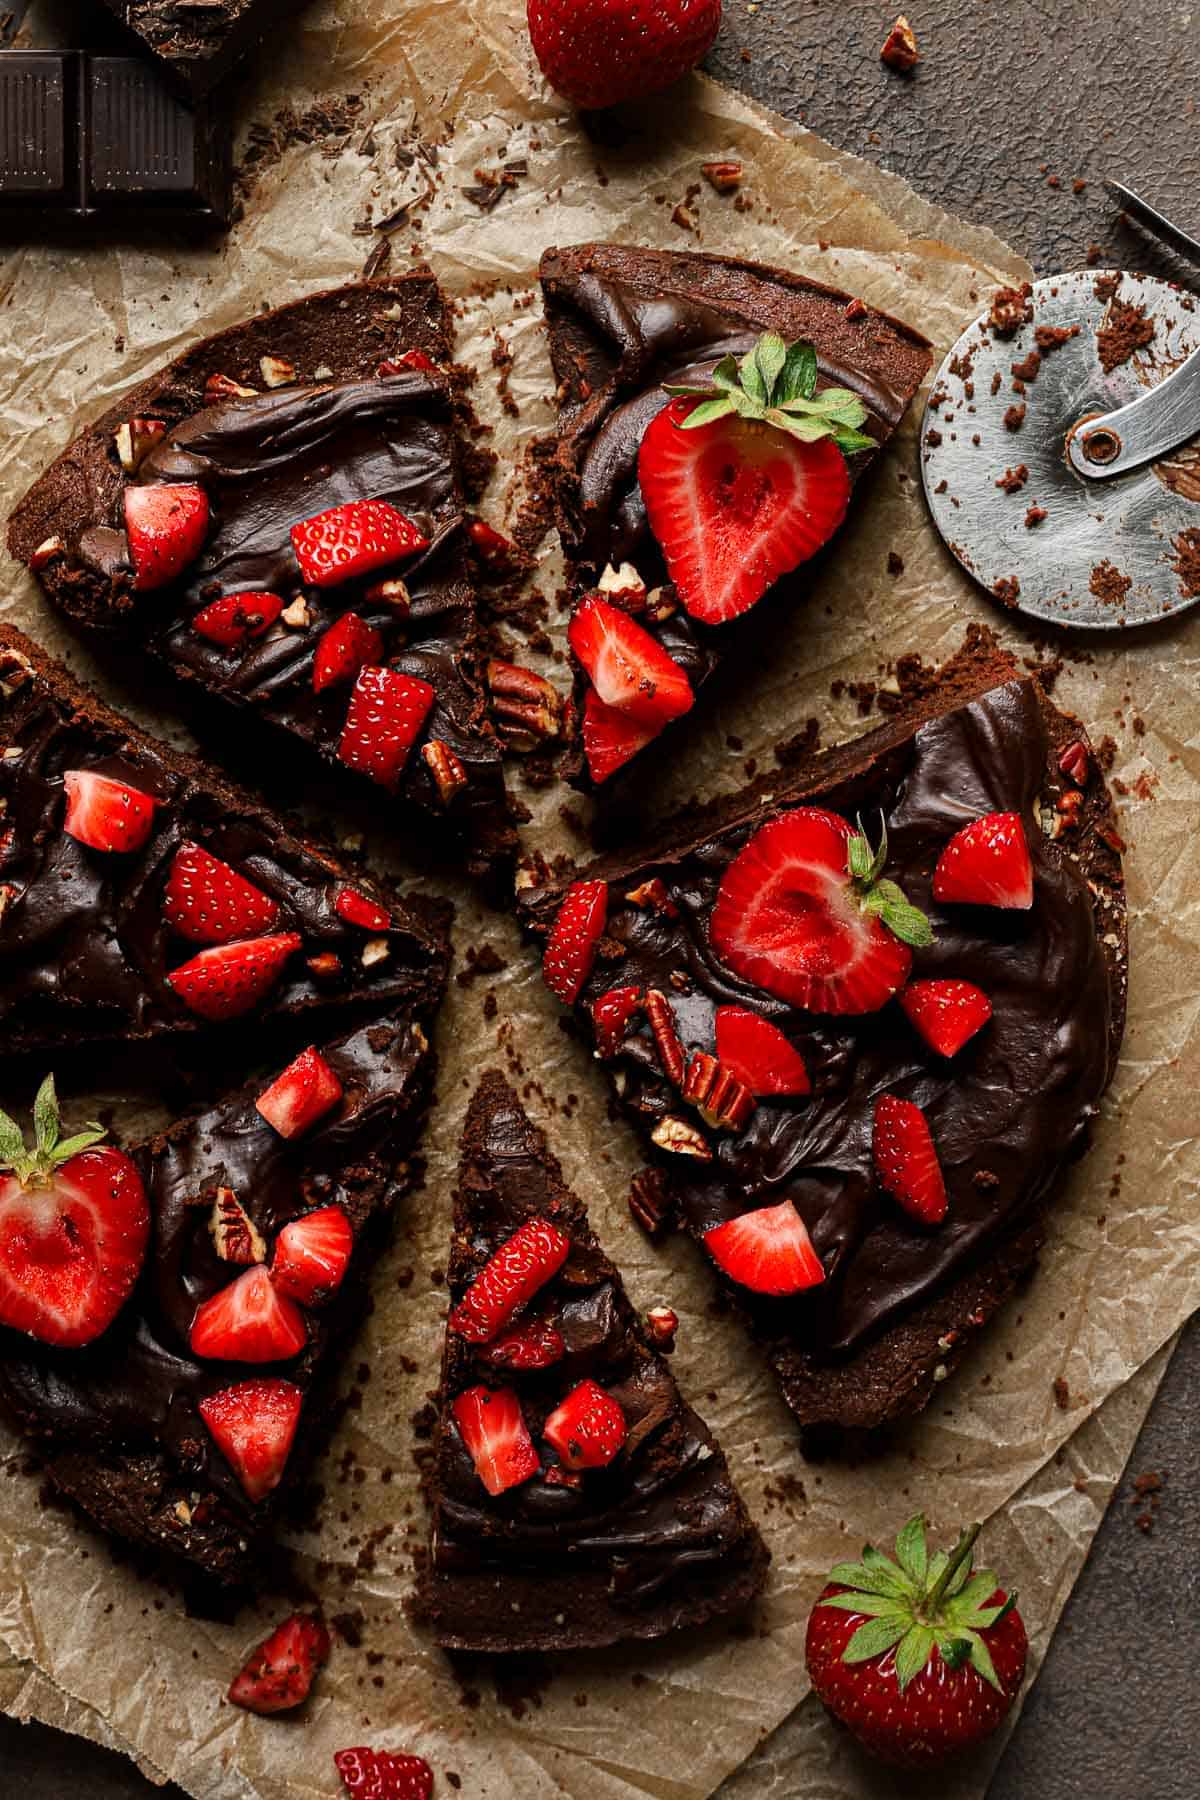 Brownie Pizza is the dessert to make when you want to have fun. A fudgy chocolate brownie topped with silky smooth ganache and sprinkled with fresh strawberries. |#bakingrecipe #browniepizza #brownierecipe #pizza #dessertpizzarecipe #chocolaterecipe|